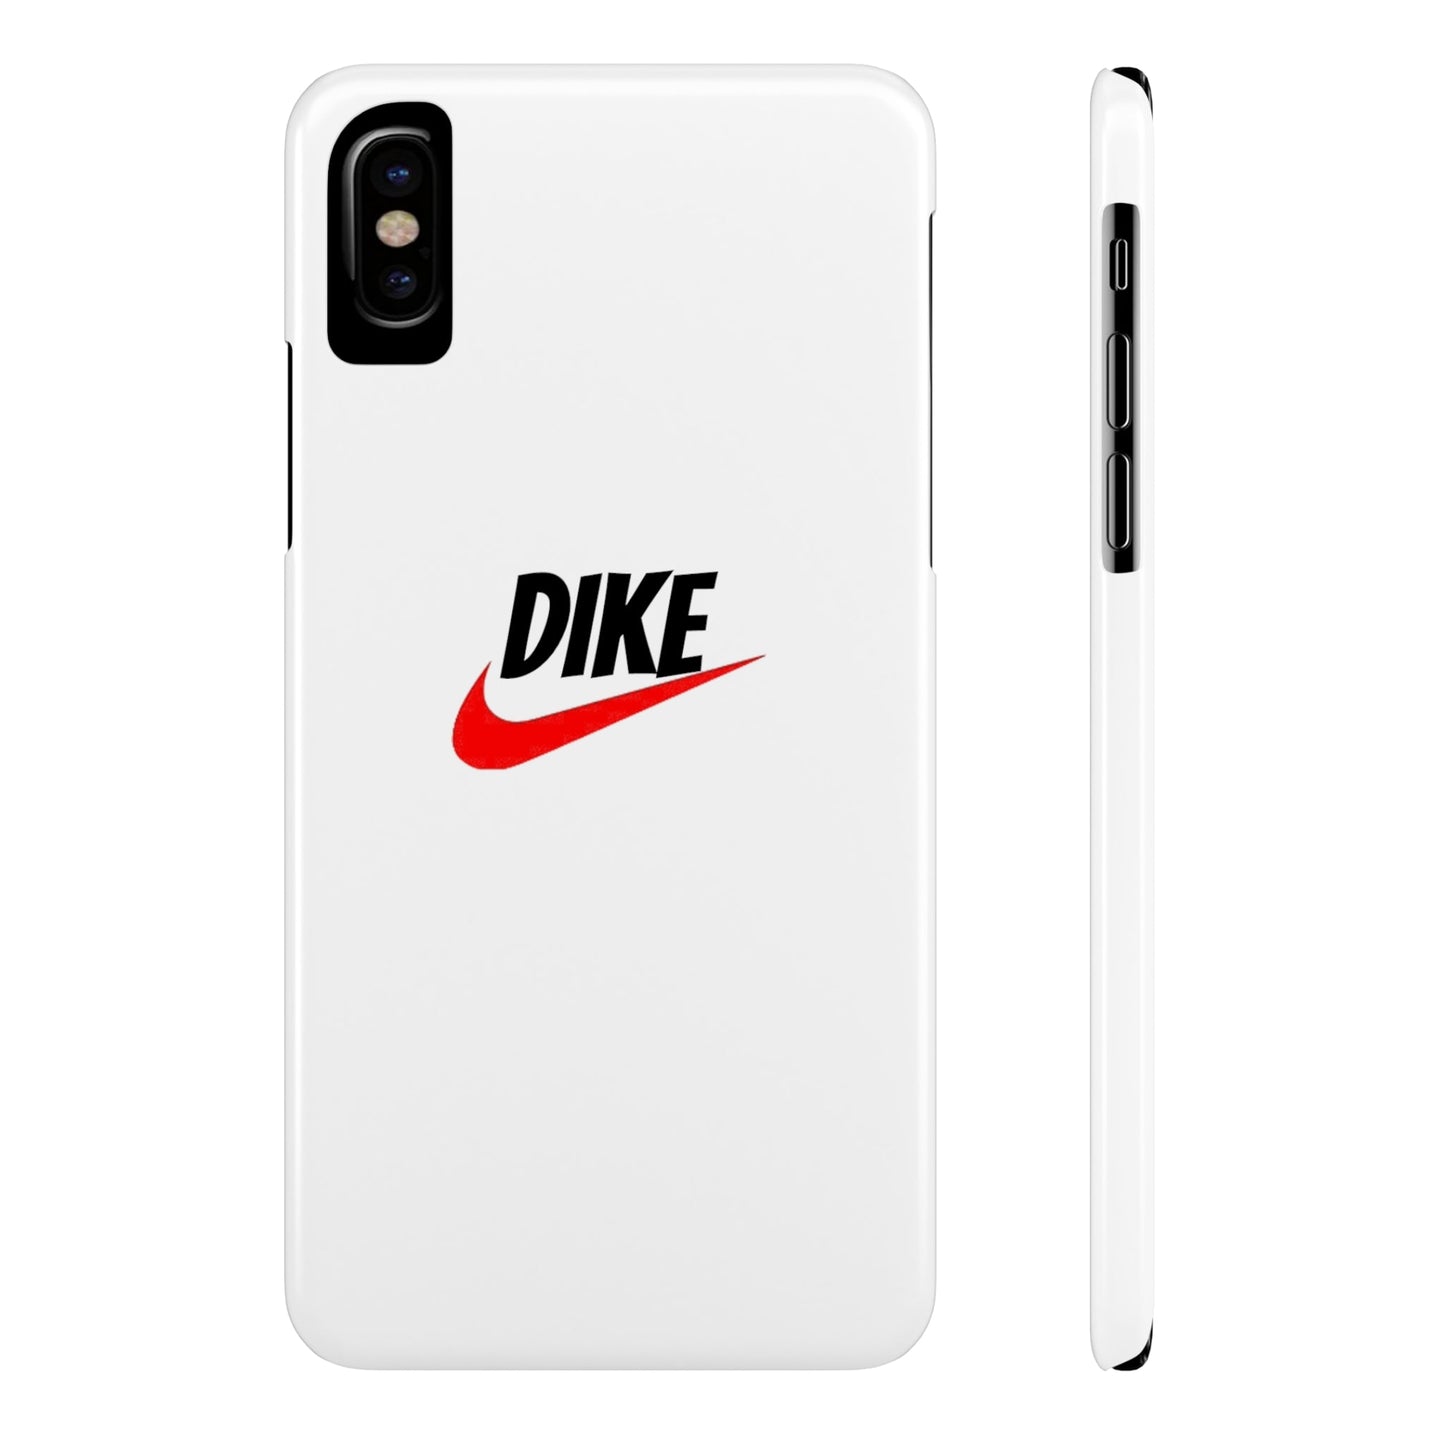 "Dike" MagStrong Phone Cases iPhone X Slim